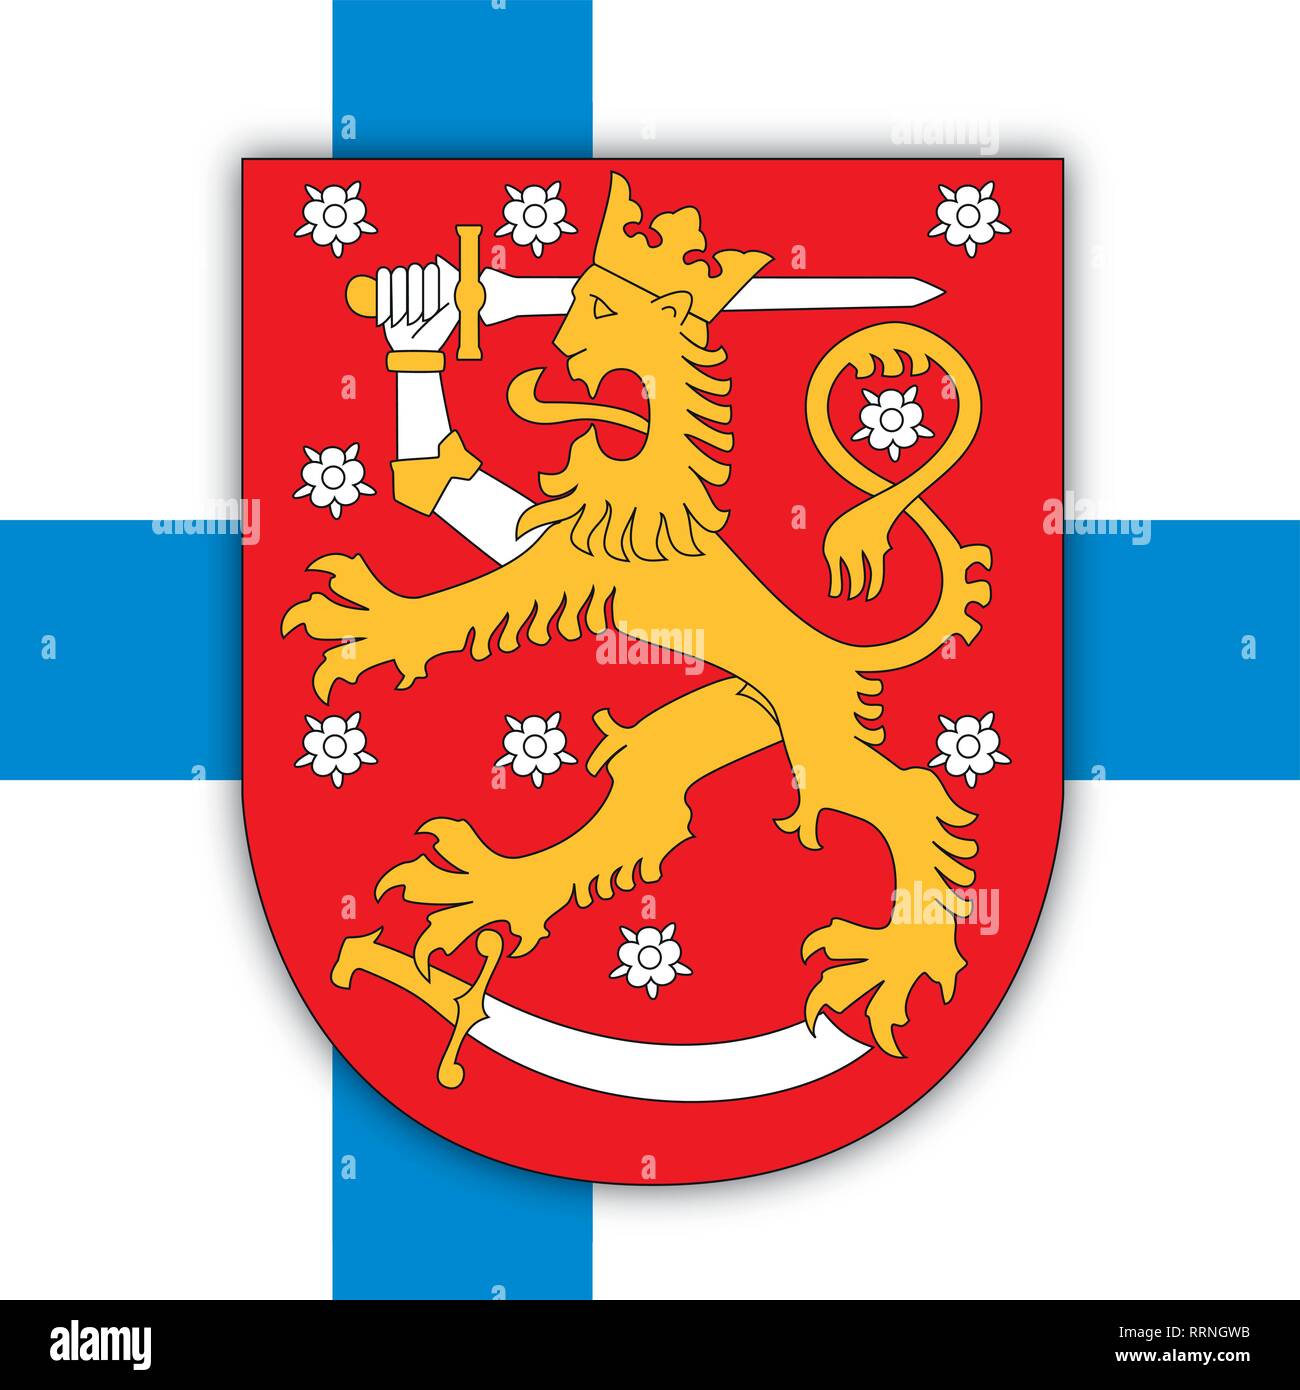 Suomi Finland coat of arms on the national flag, vector illustration Stock Vector